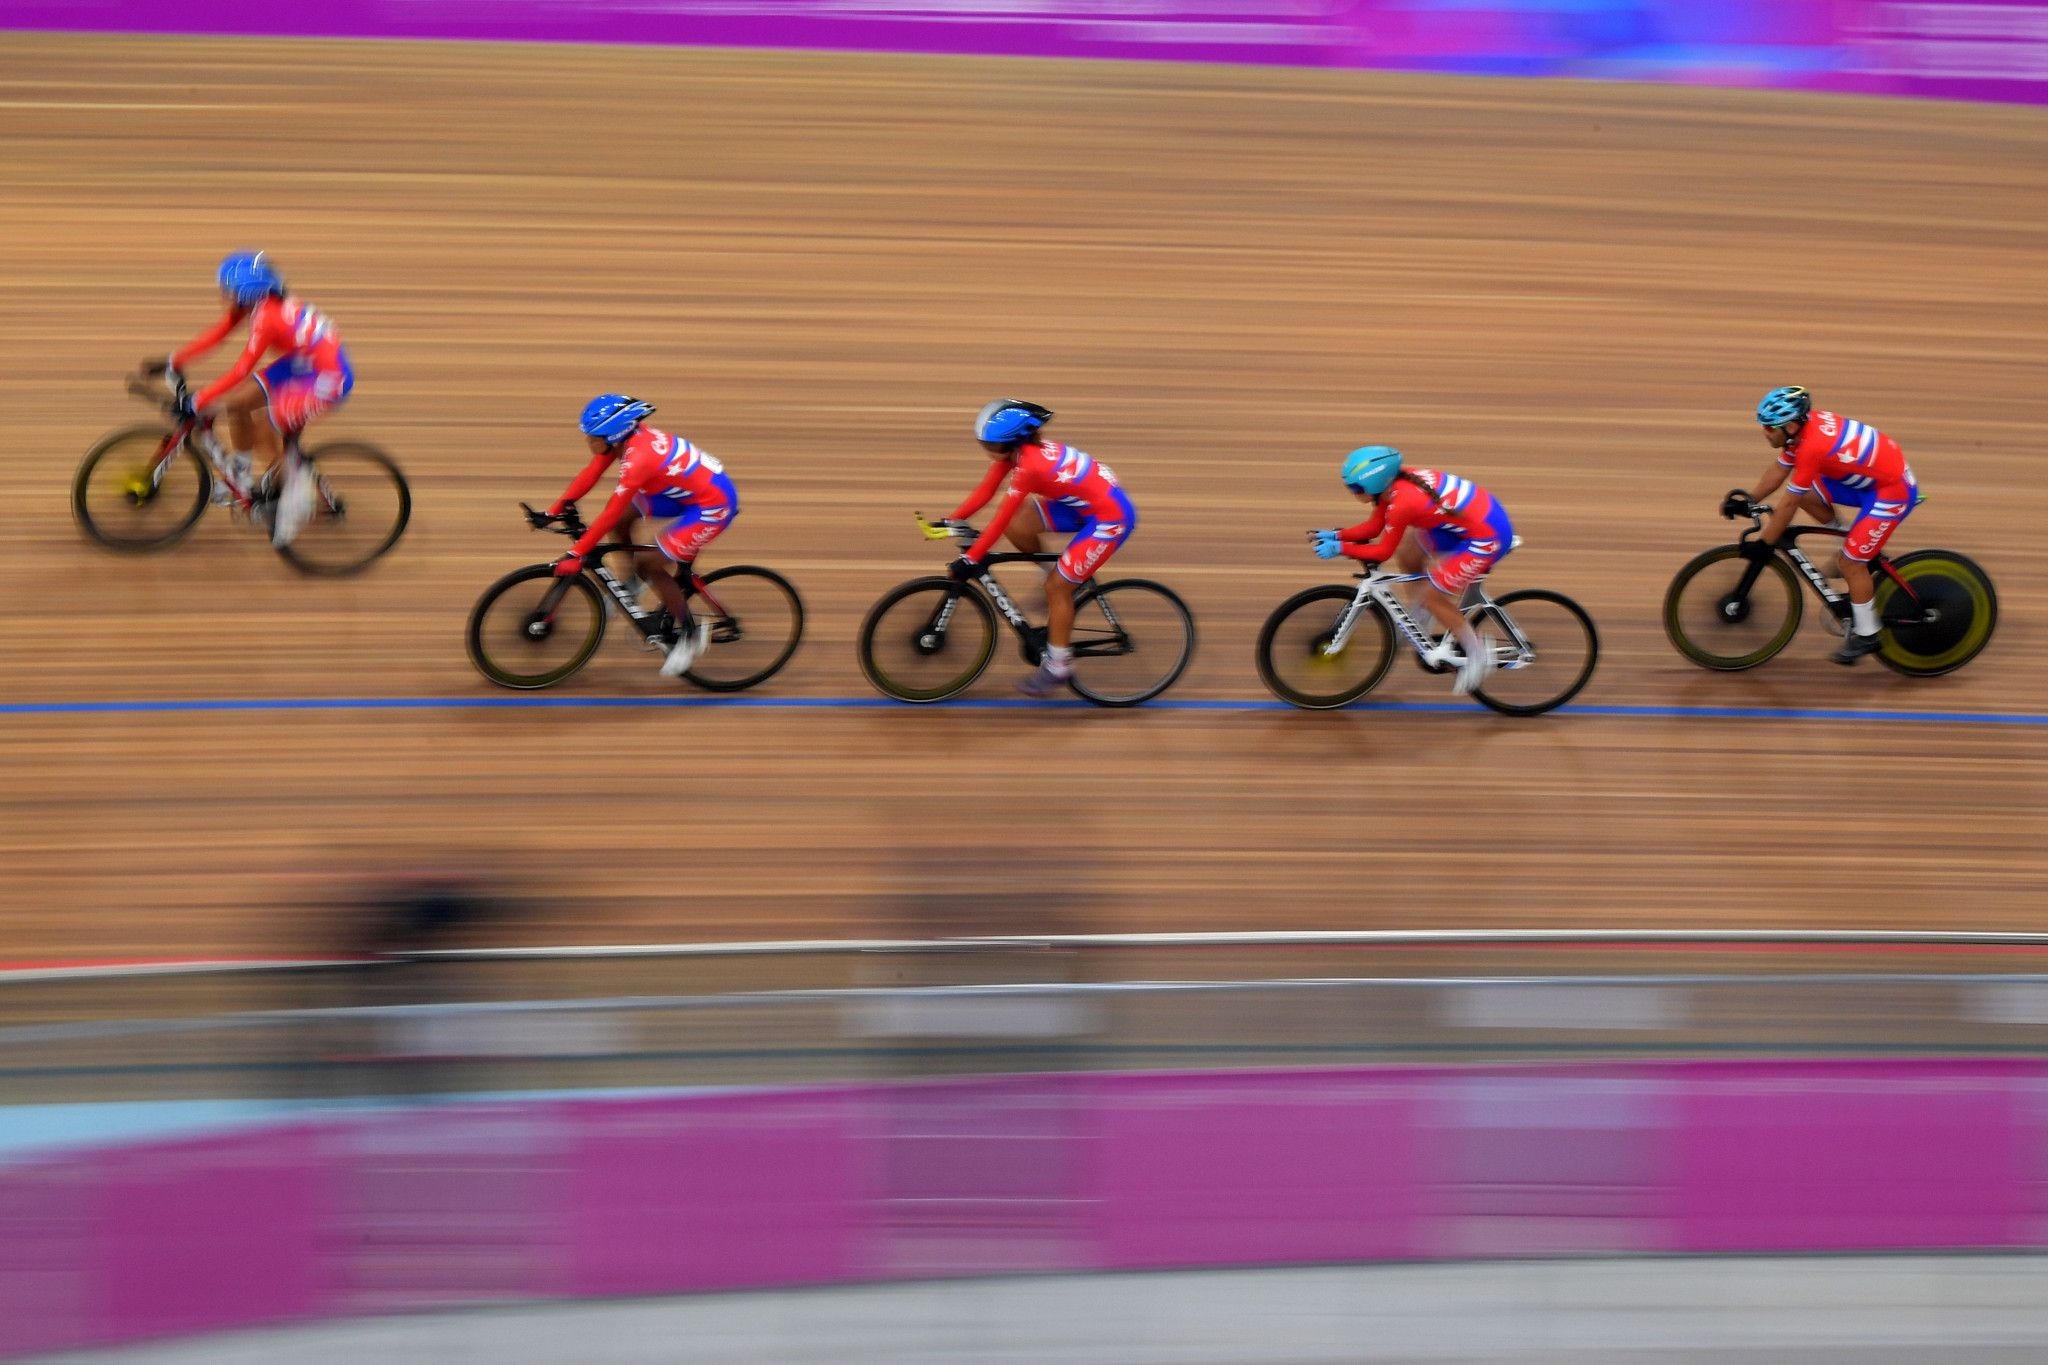 Track cycling competition began at the recently completed velodrome ©Getty Images